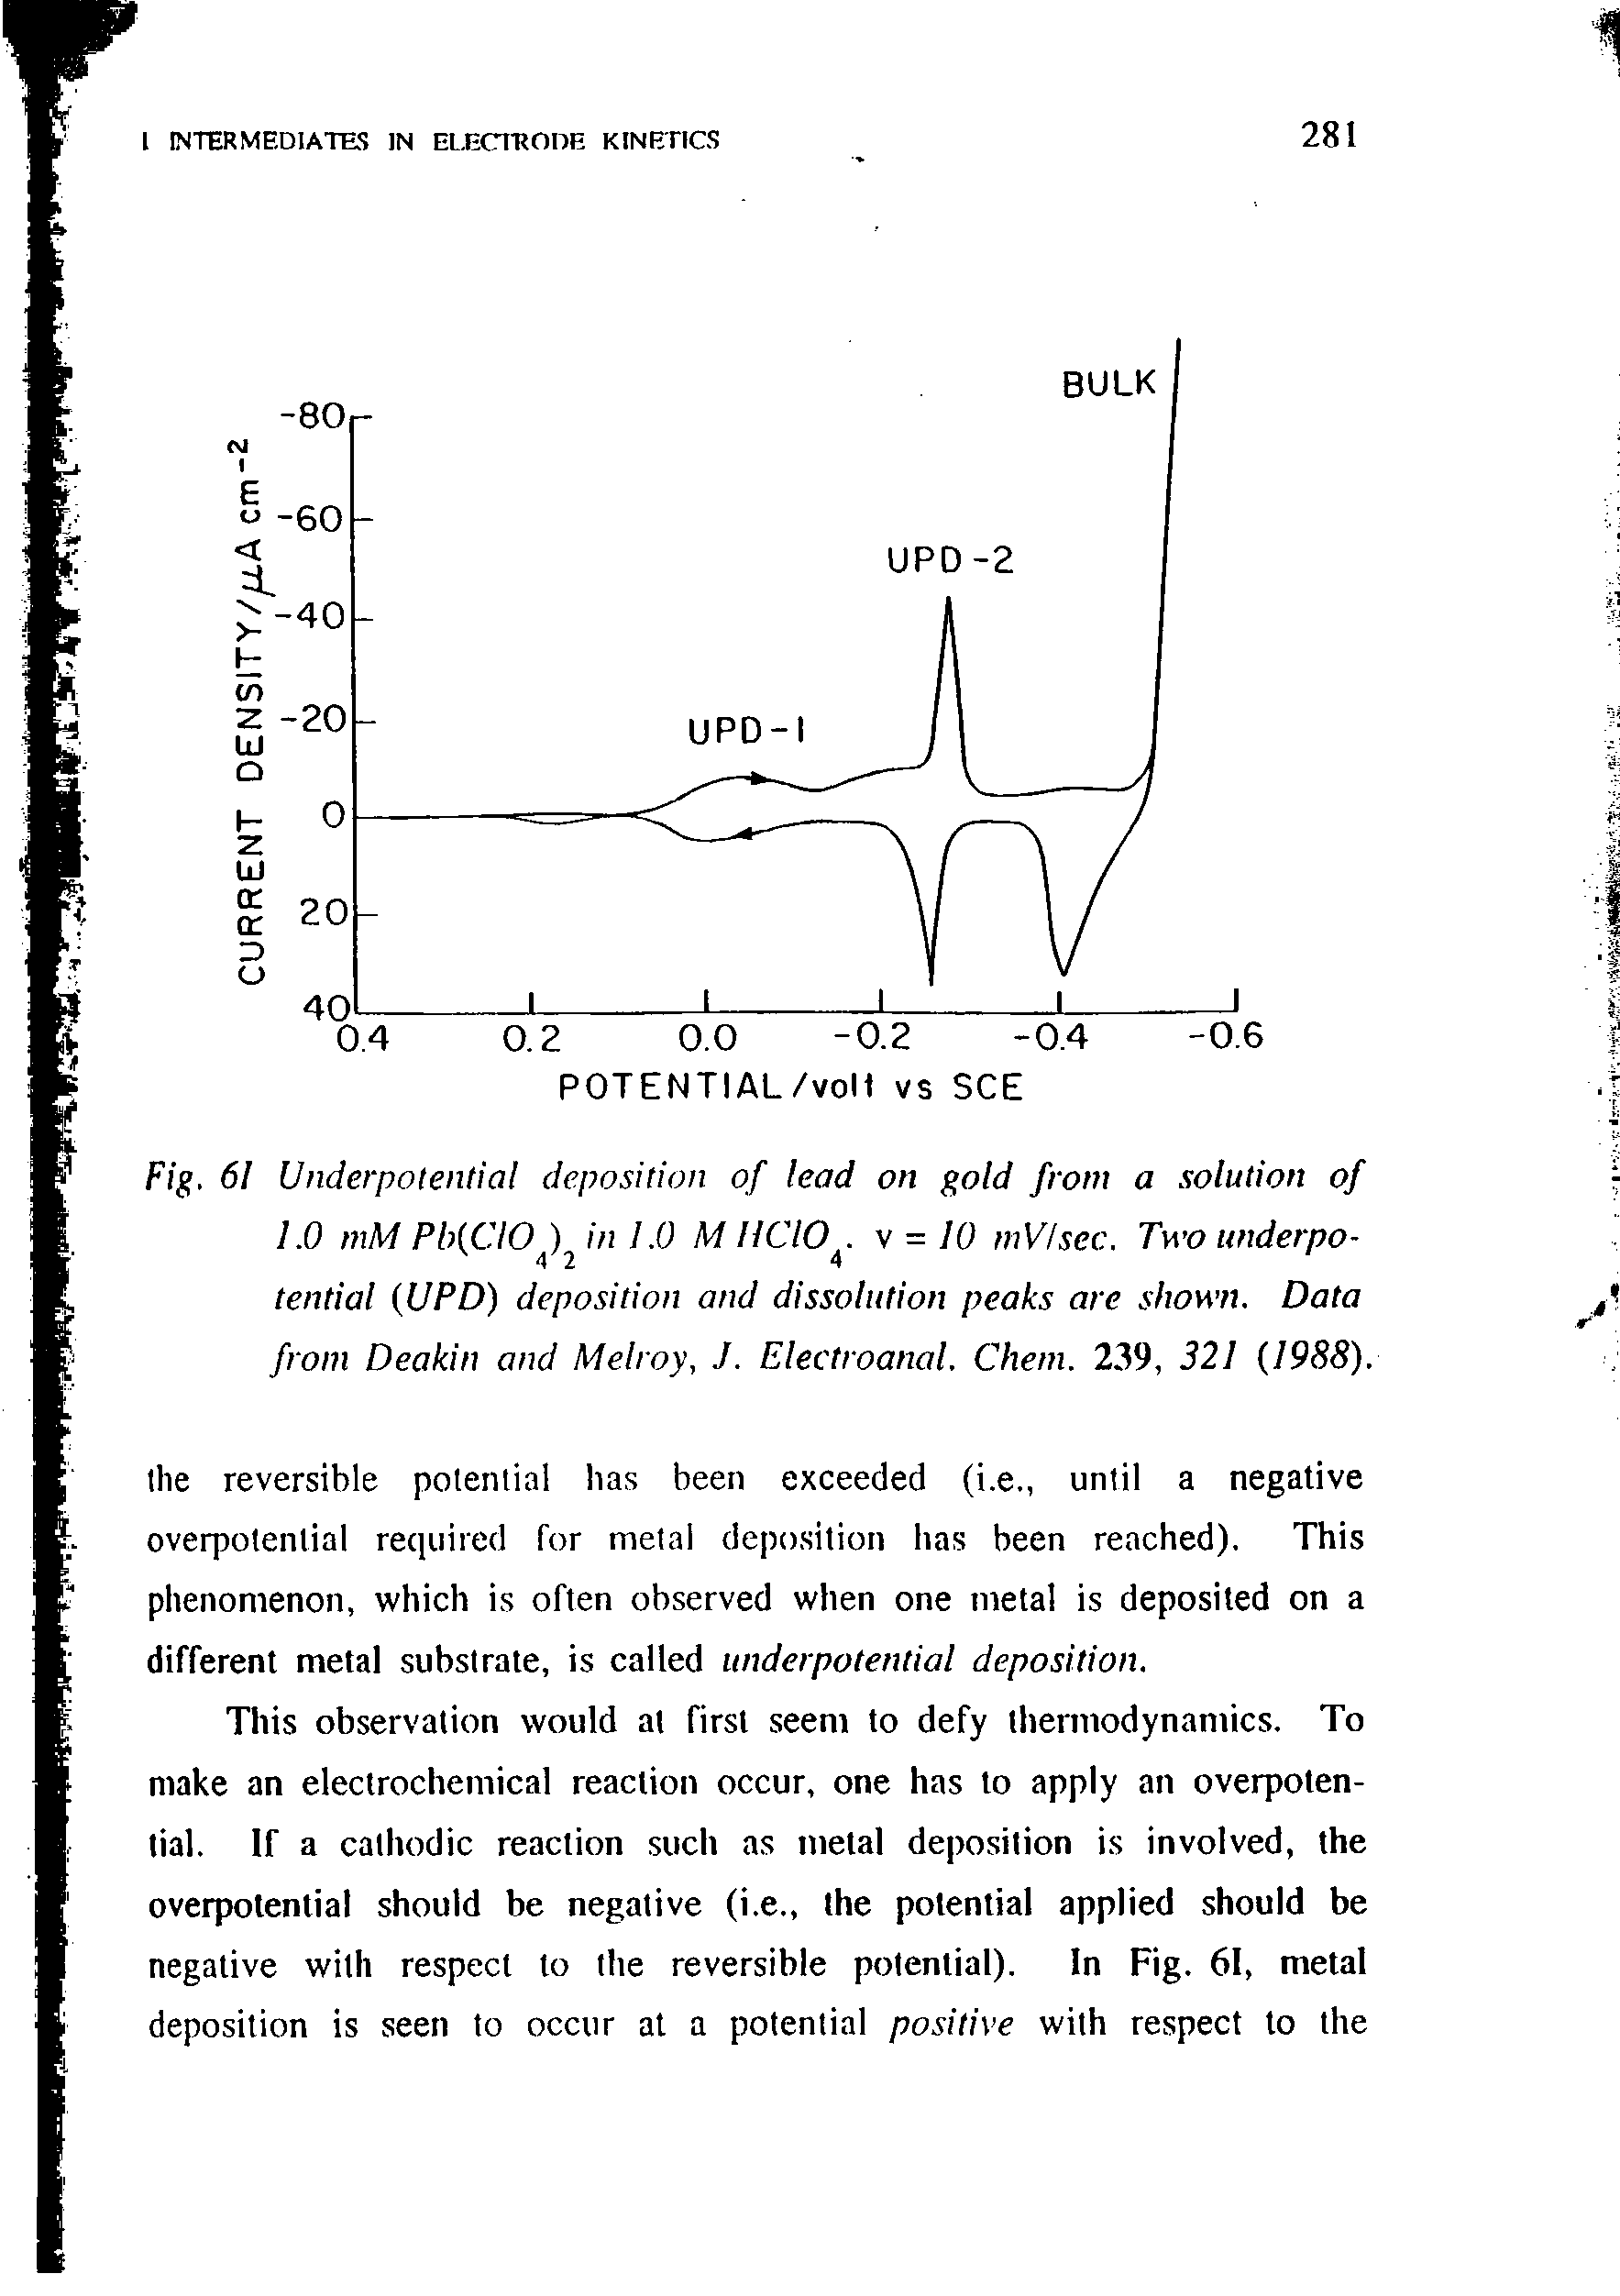 Fig. 61 Underpotential deposition of lead on gold from a solution of 1.0 mM Pb ClO ) in 1.0 MllClO. v = 10 mV/sec. Two underpotential (UPD) deposition and dissolution peaks are shown. Data from Deakin and Melroy, J. Electroanal. Chem. 239, 321 1988).